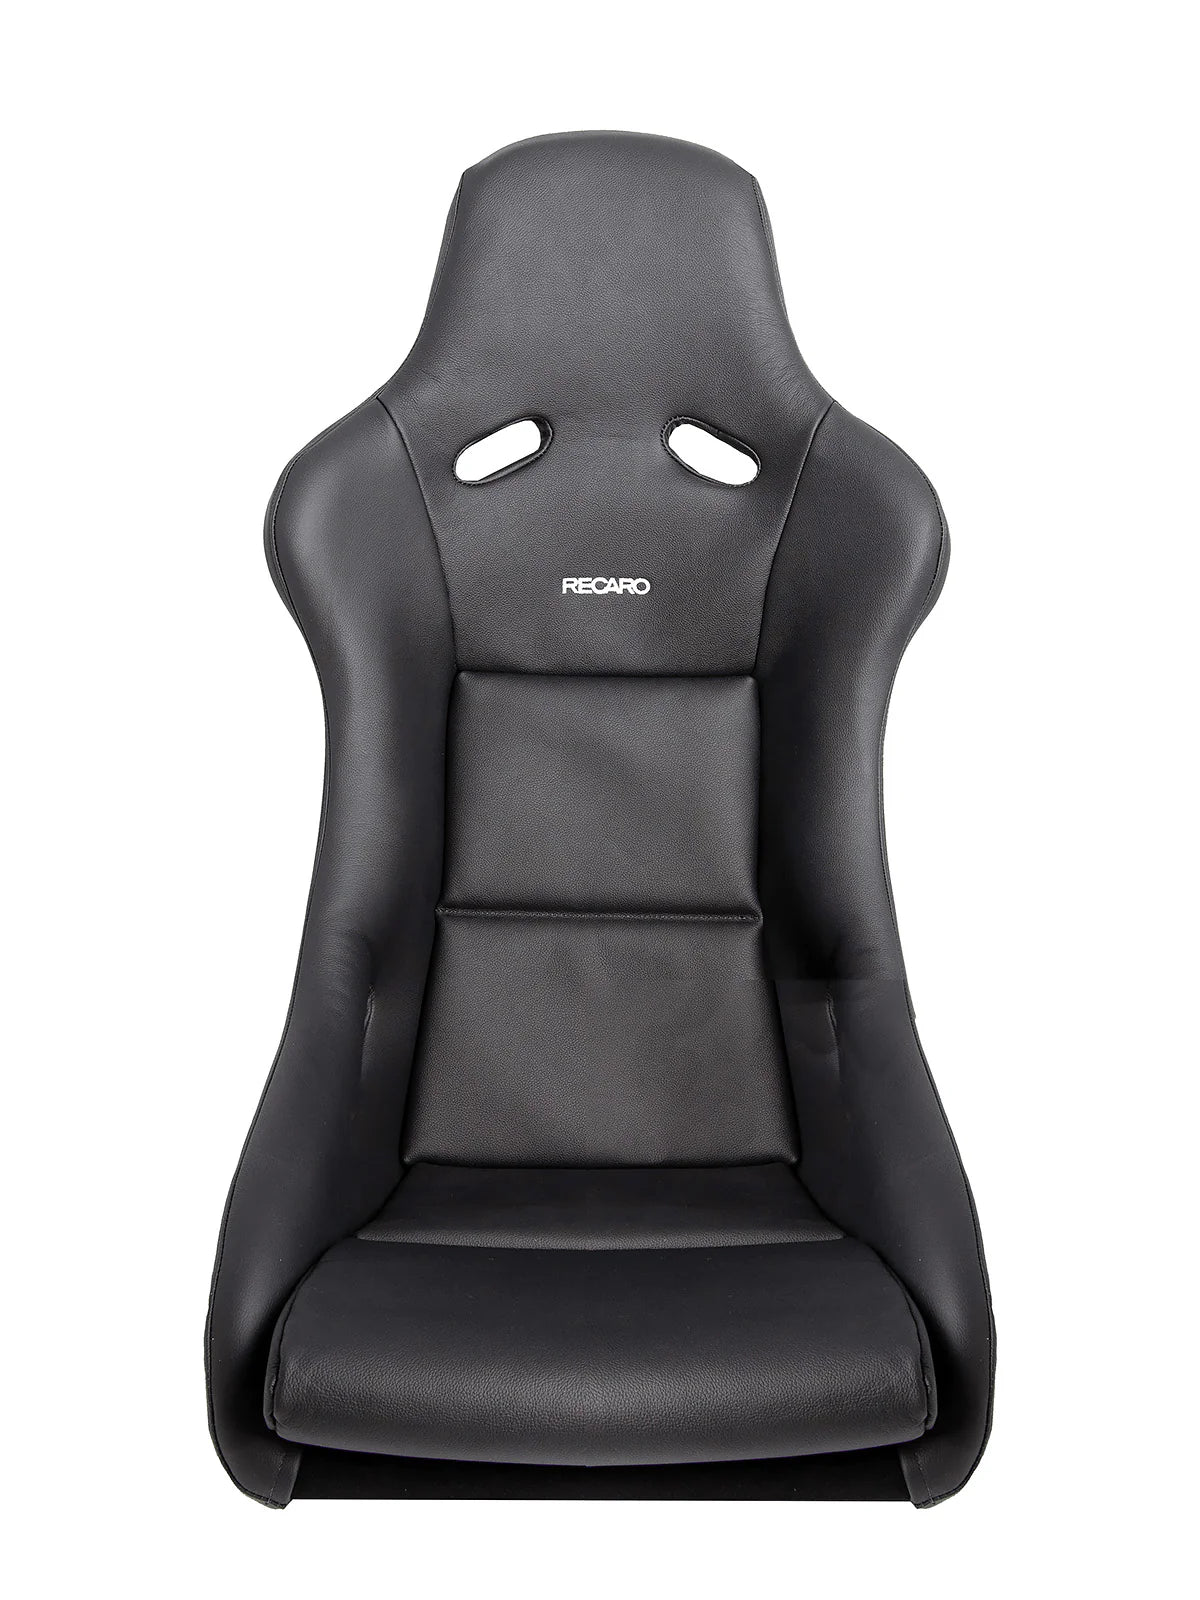 Recaro Pole Position N.G. FIA Approved Seat